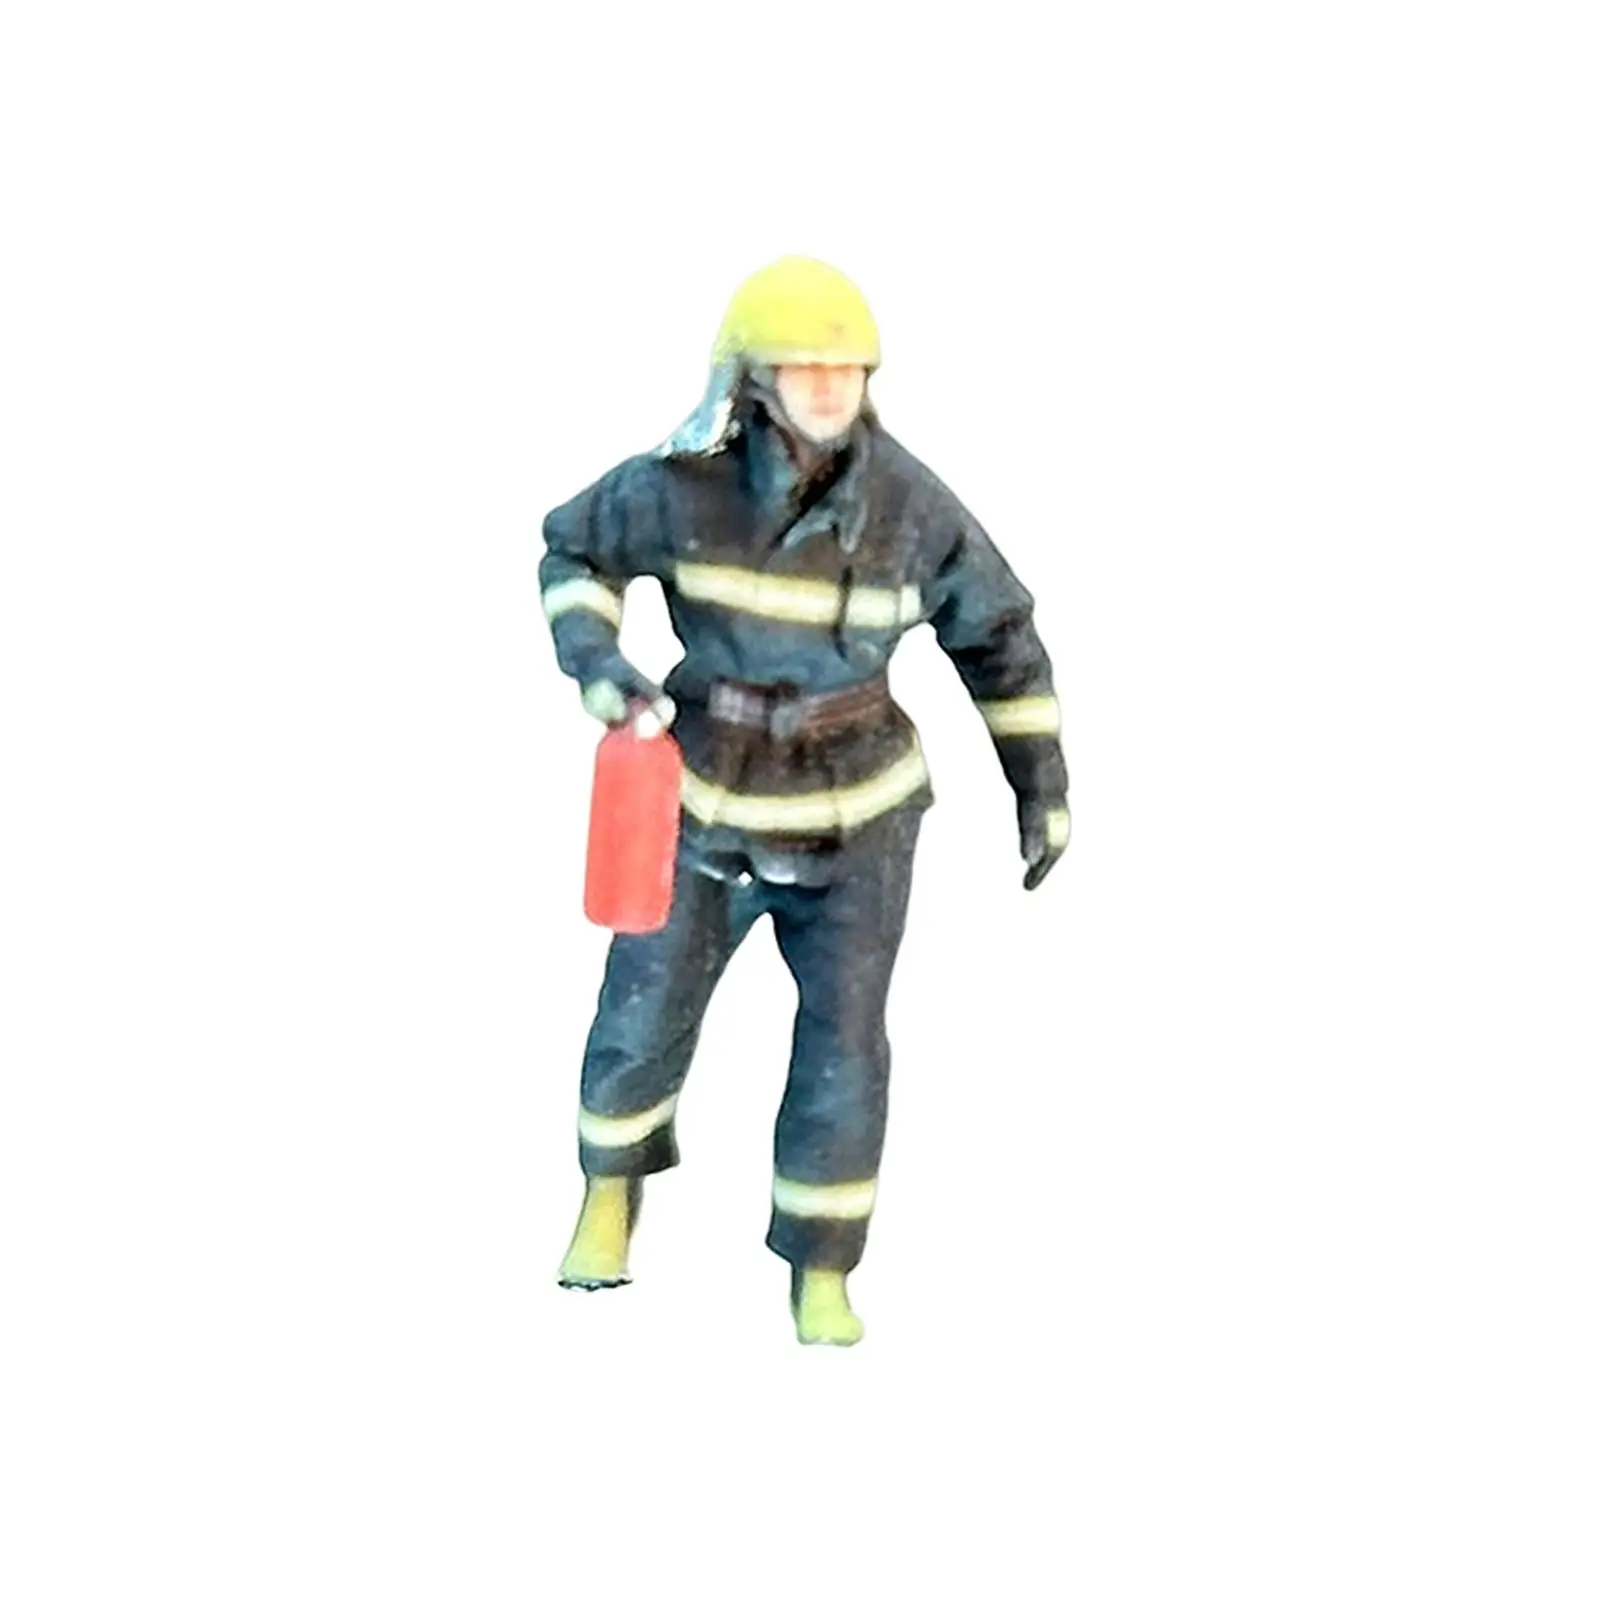 1/64 Resin Firefighter Figures Model Trains People Figures for Photography Props Building Diorama Scenery Landscape Decoration